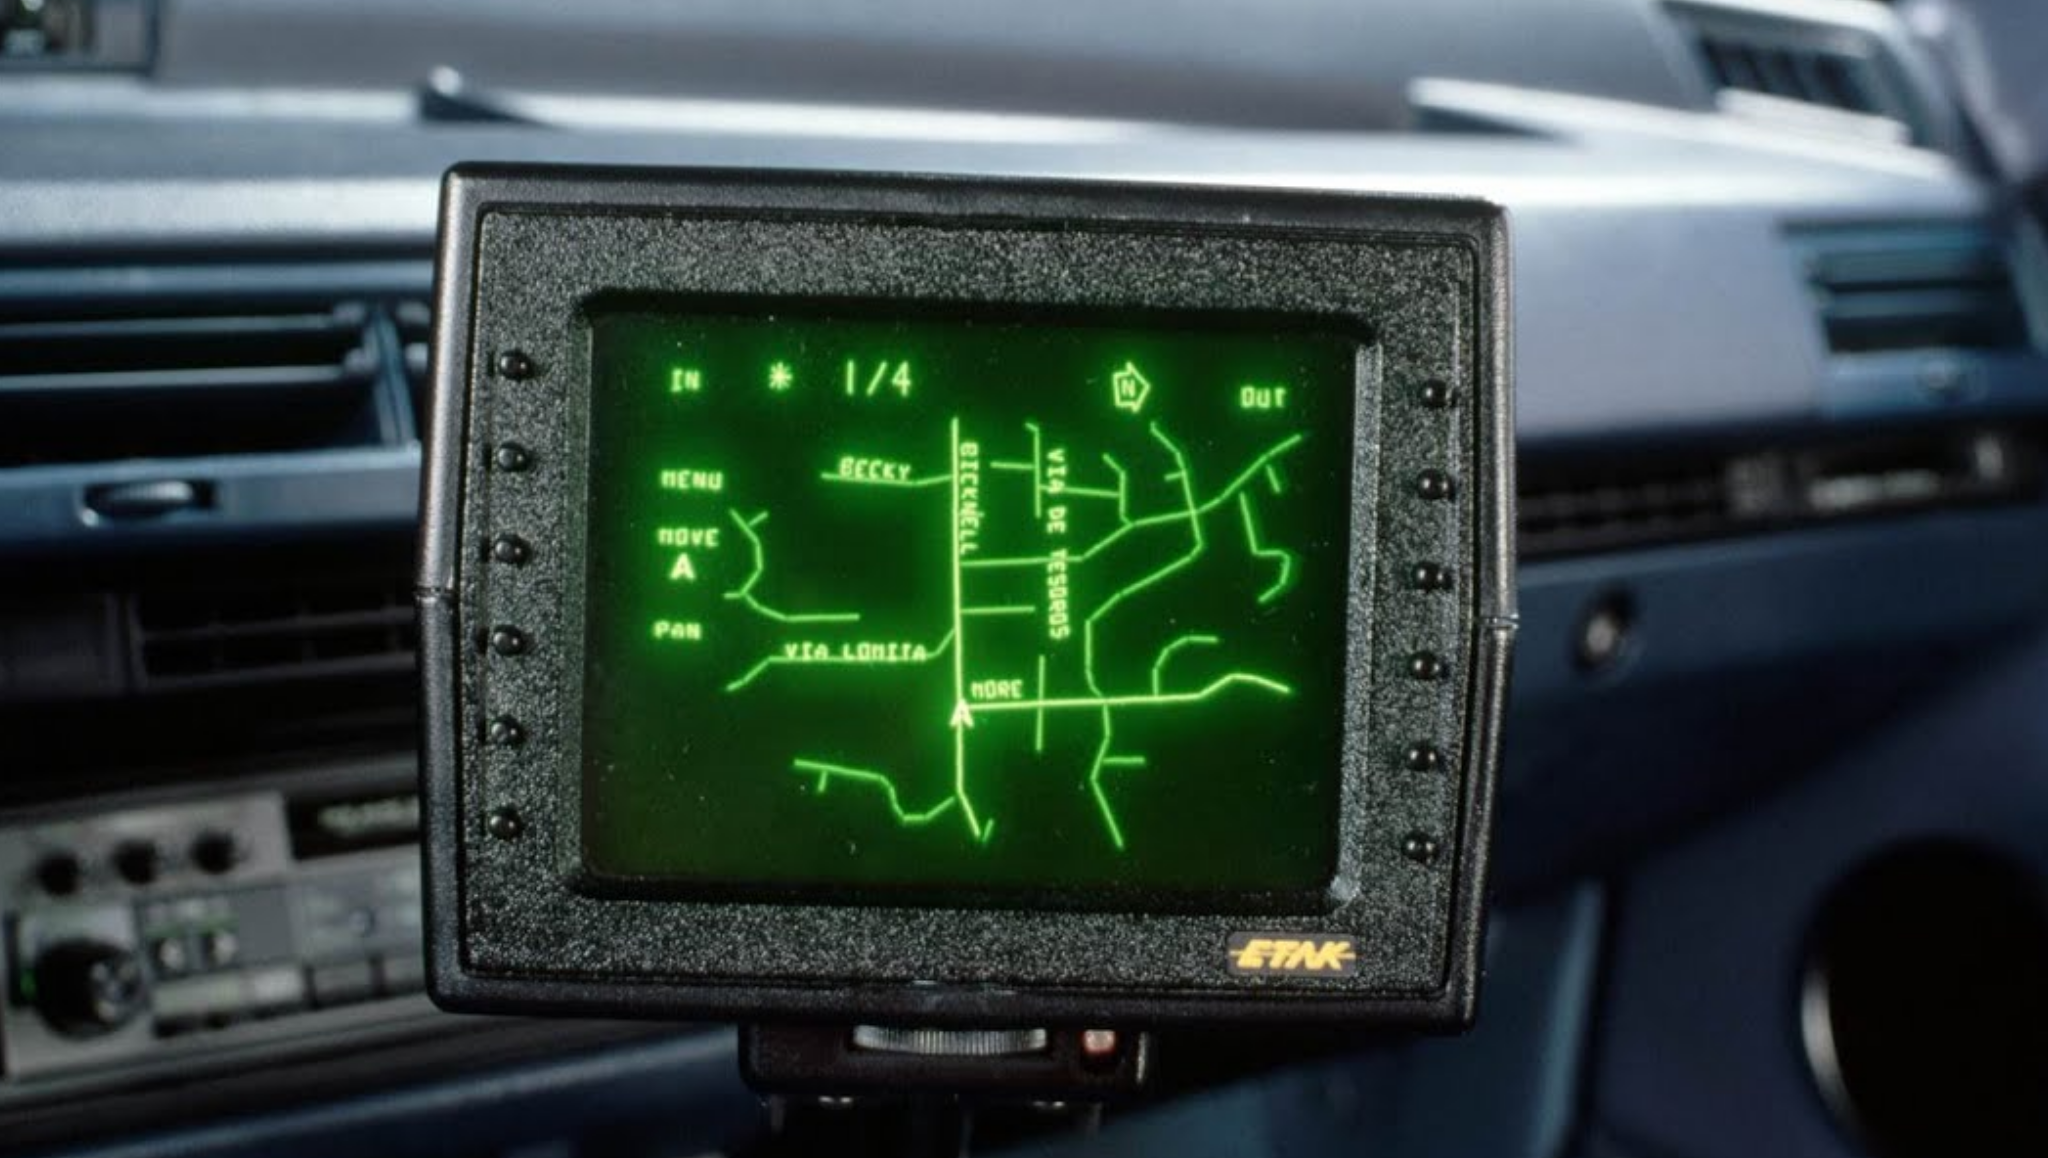 5 Ways To Add Navigation to Your Older Car